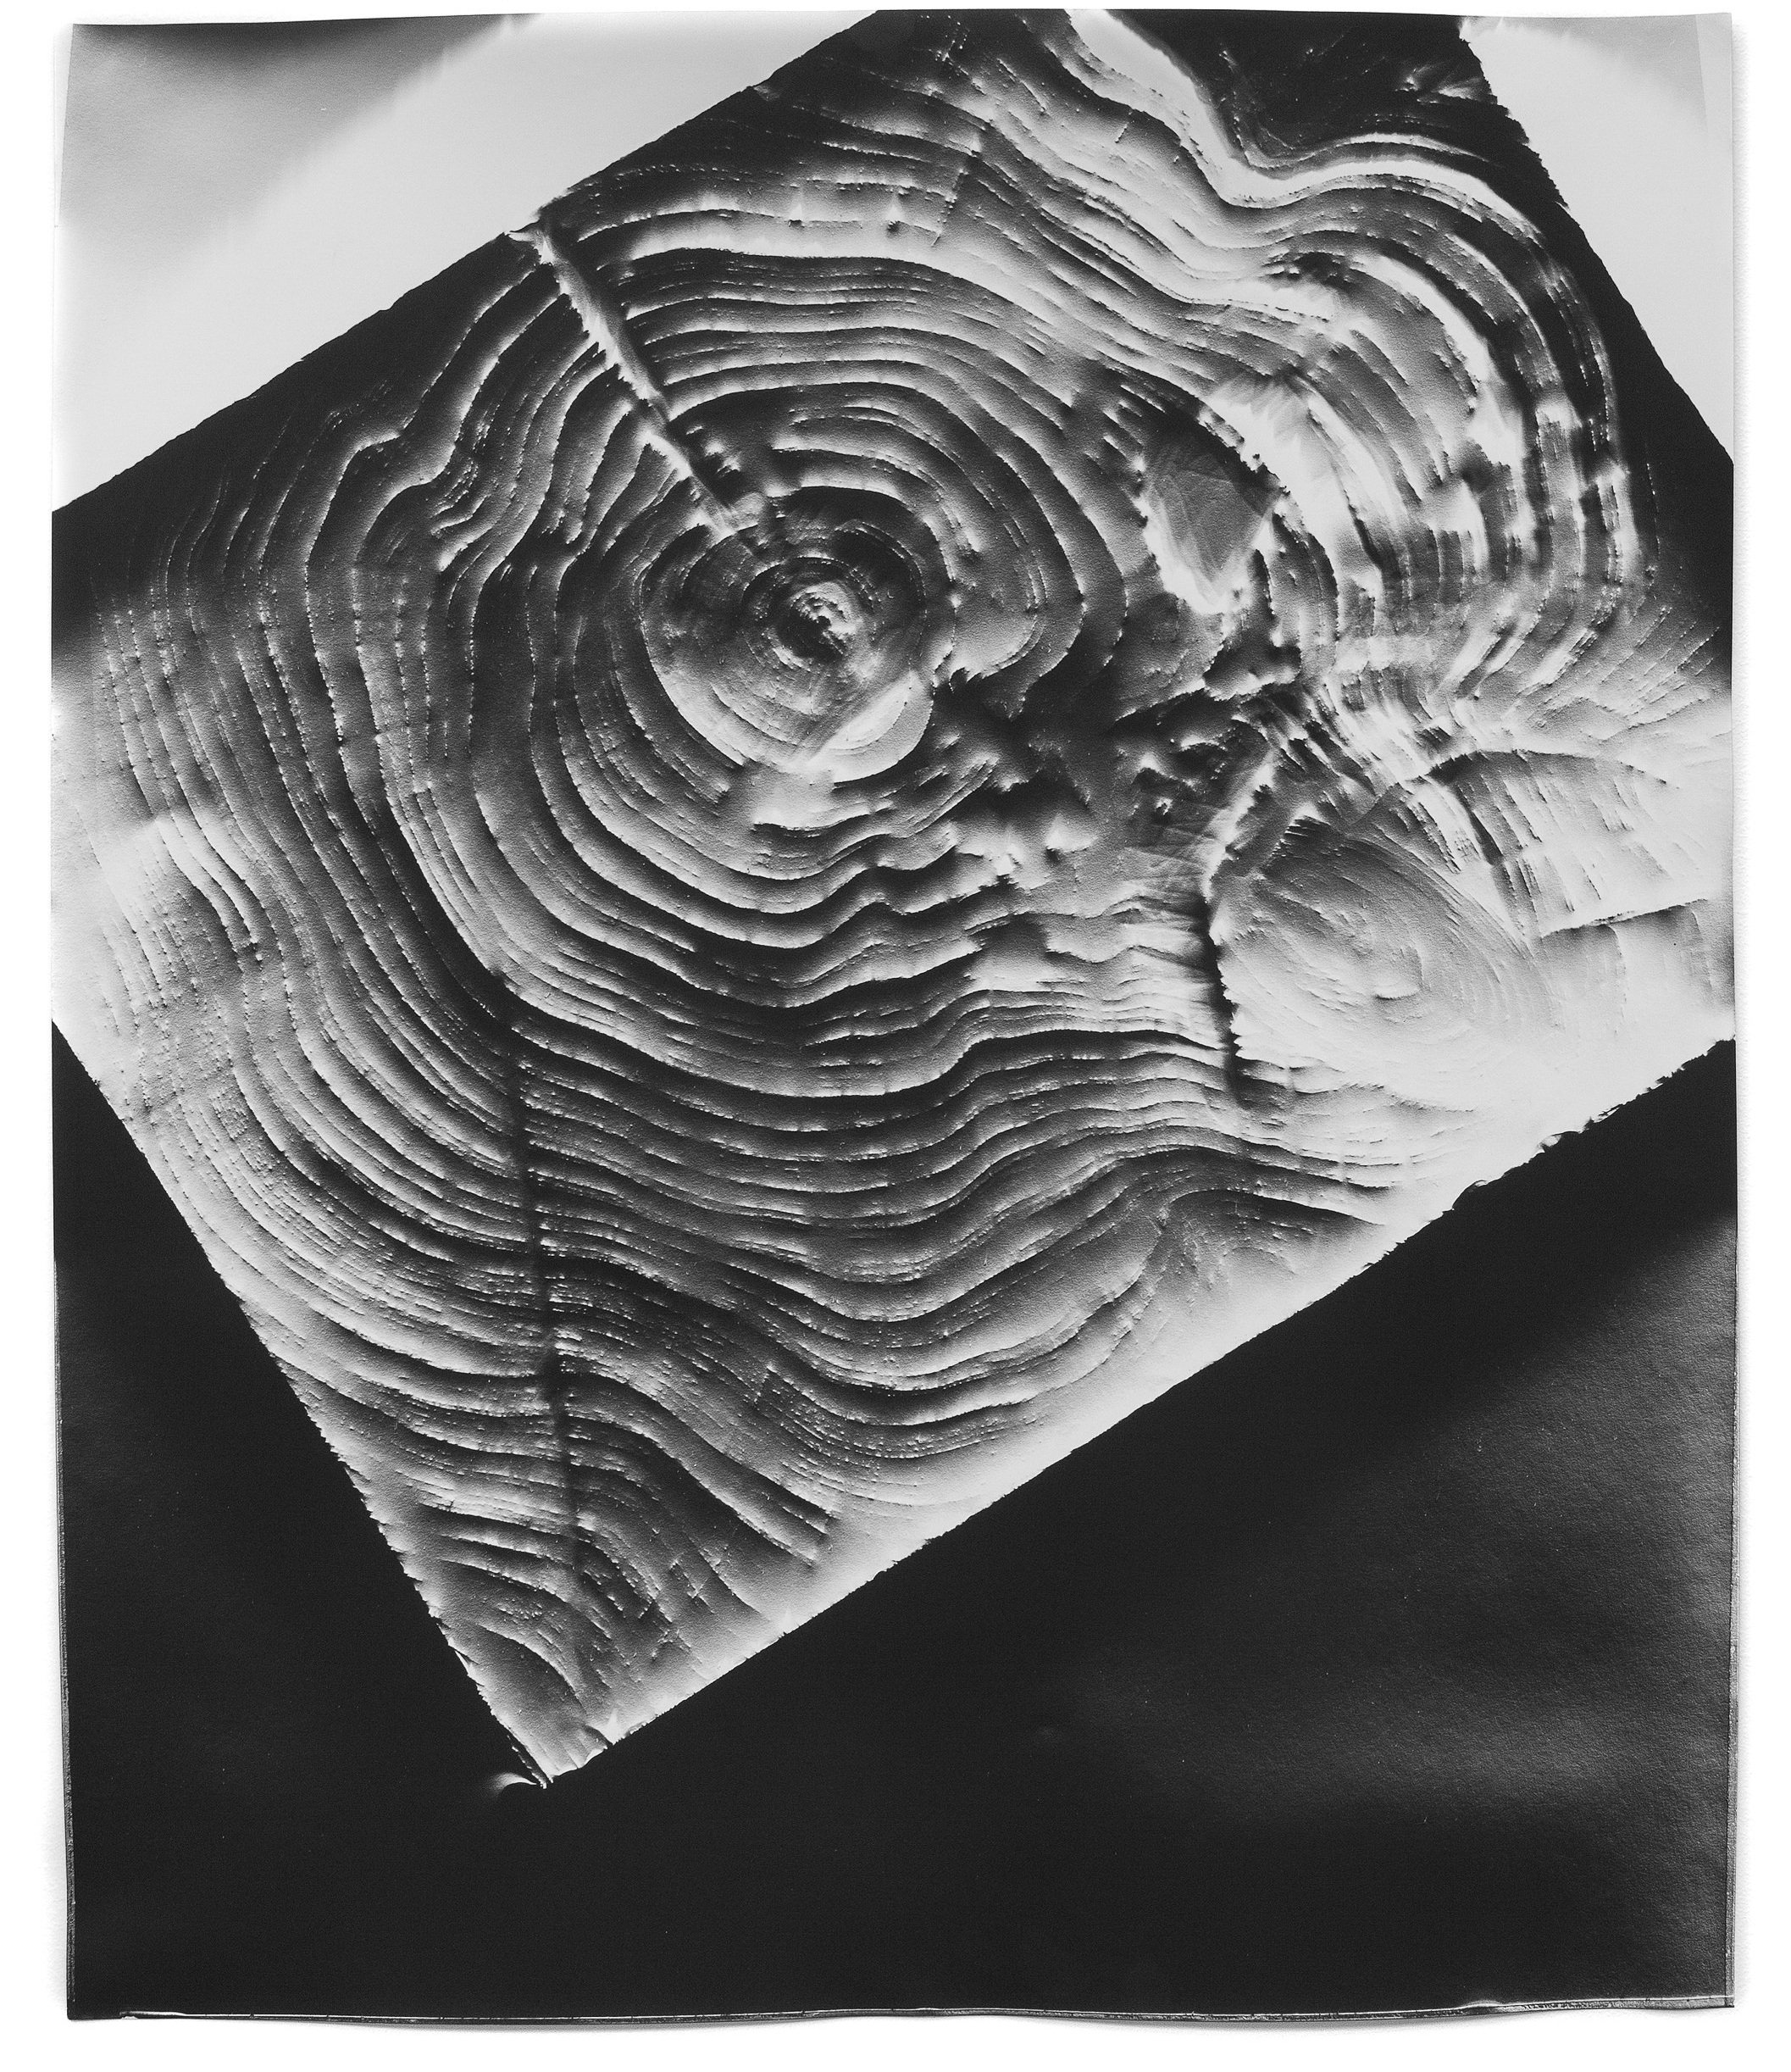   Automatic Earth 50,  2017 Photographic rubbing (embossed silver gelatin photogram) 24 x 20 in 